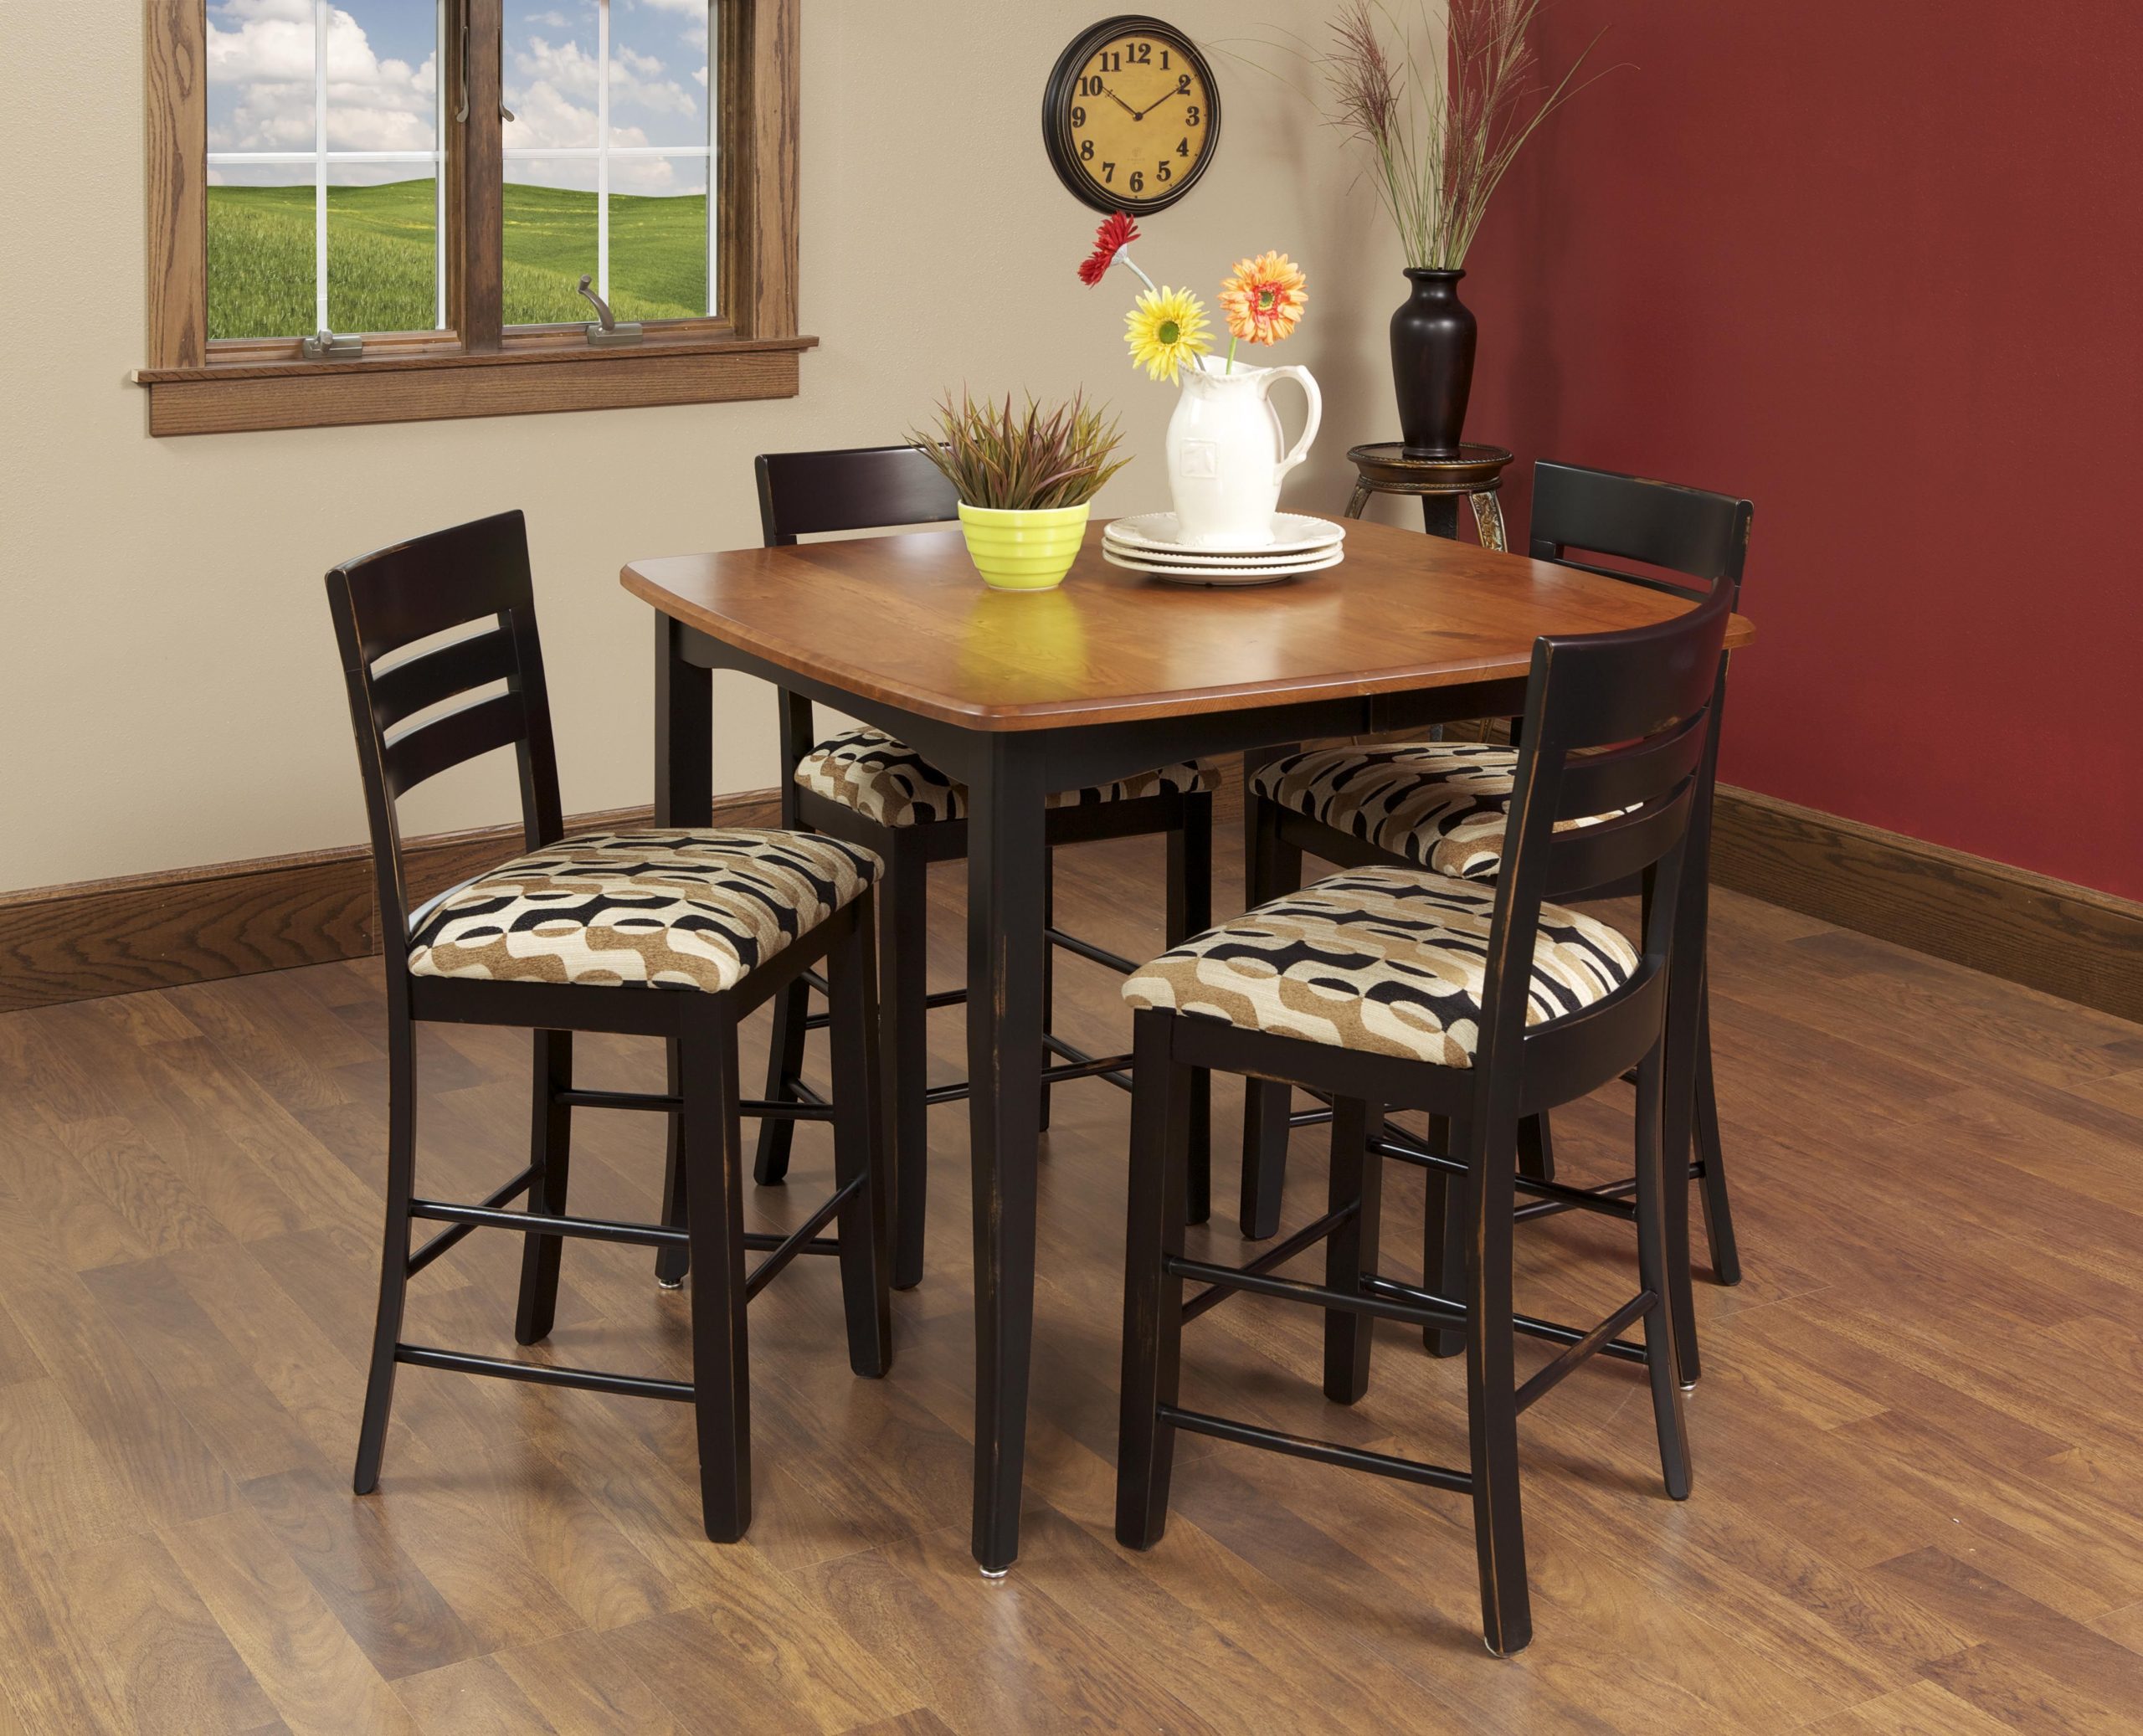 Belfast Set Amish Dining Sets Dining Room Furniture pertaining to measurements 4558 X 3692